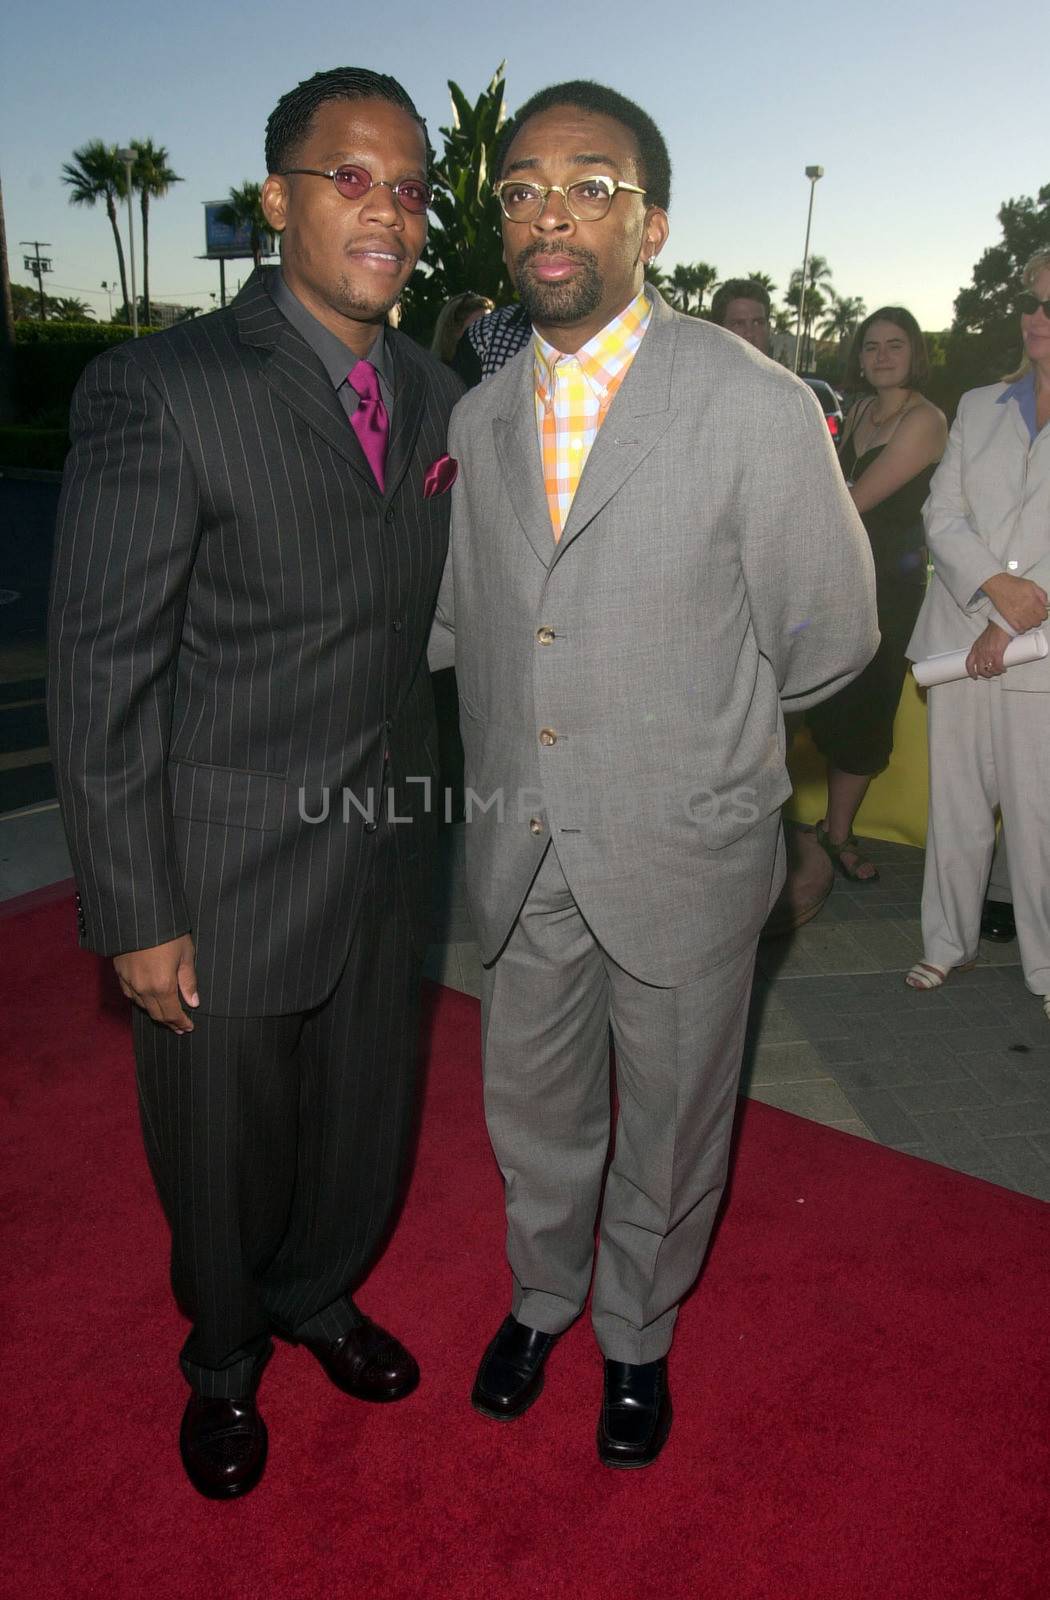 Spike Lee and D.L. Hughley at the premiere of "Original Kings of Comedy" in Hollywood. 08-10-00